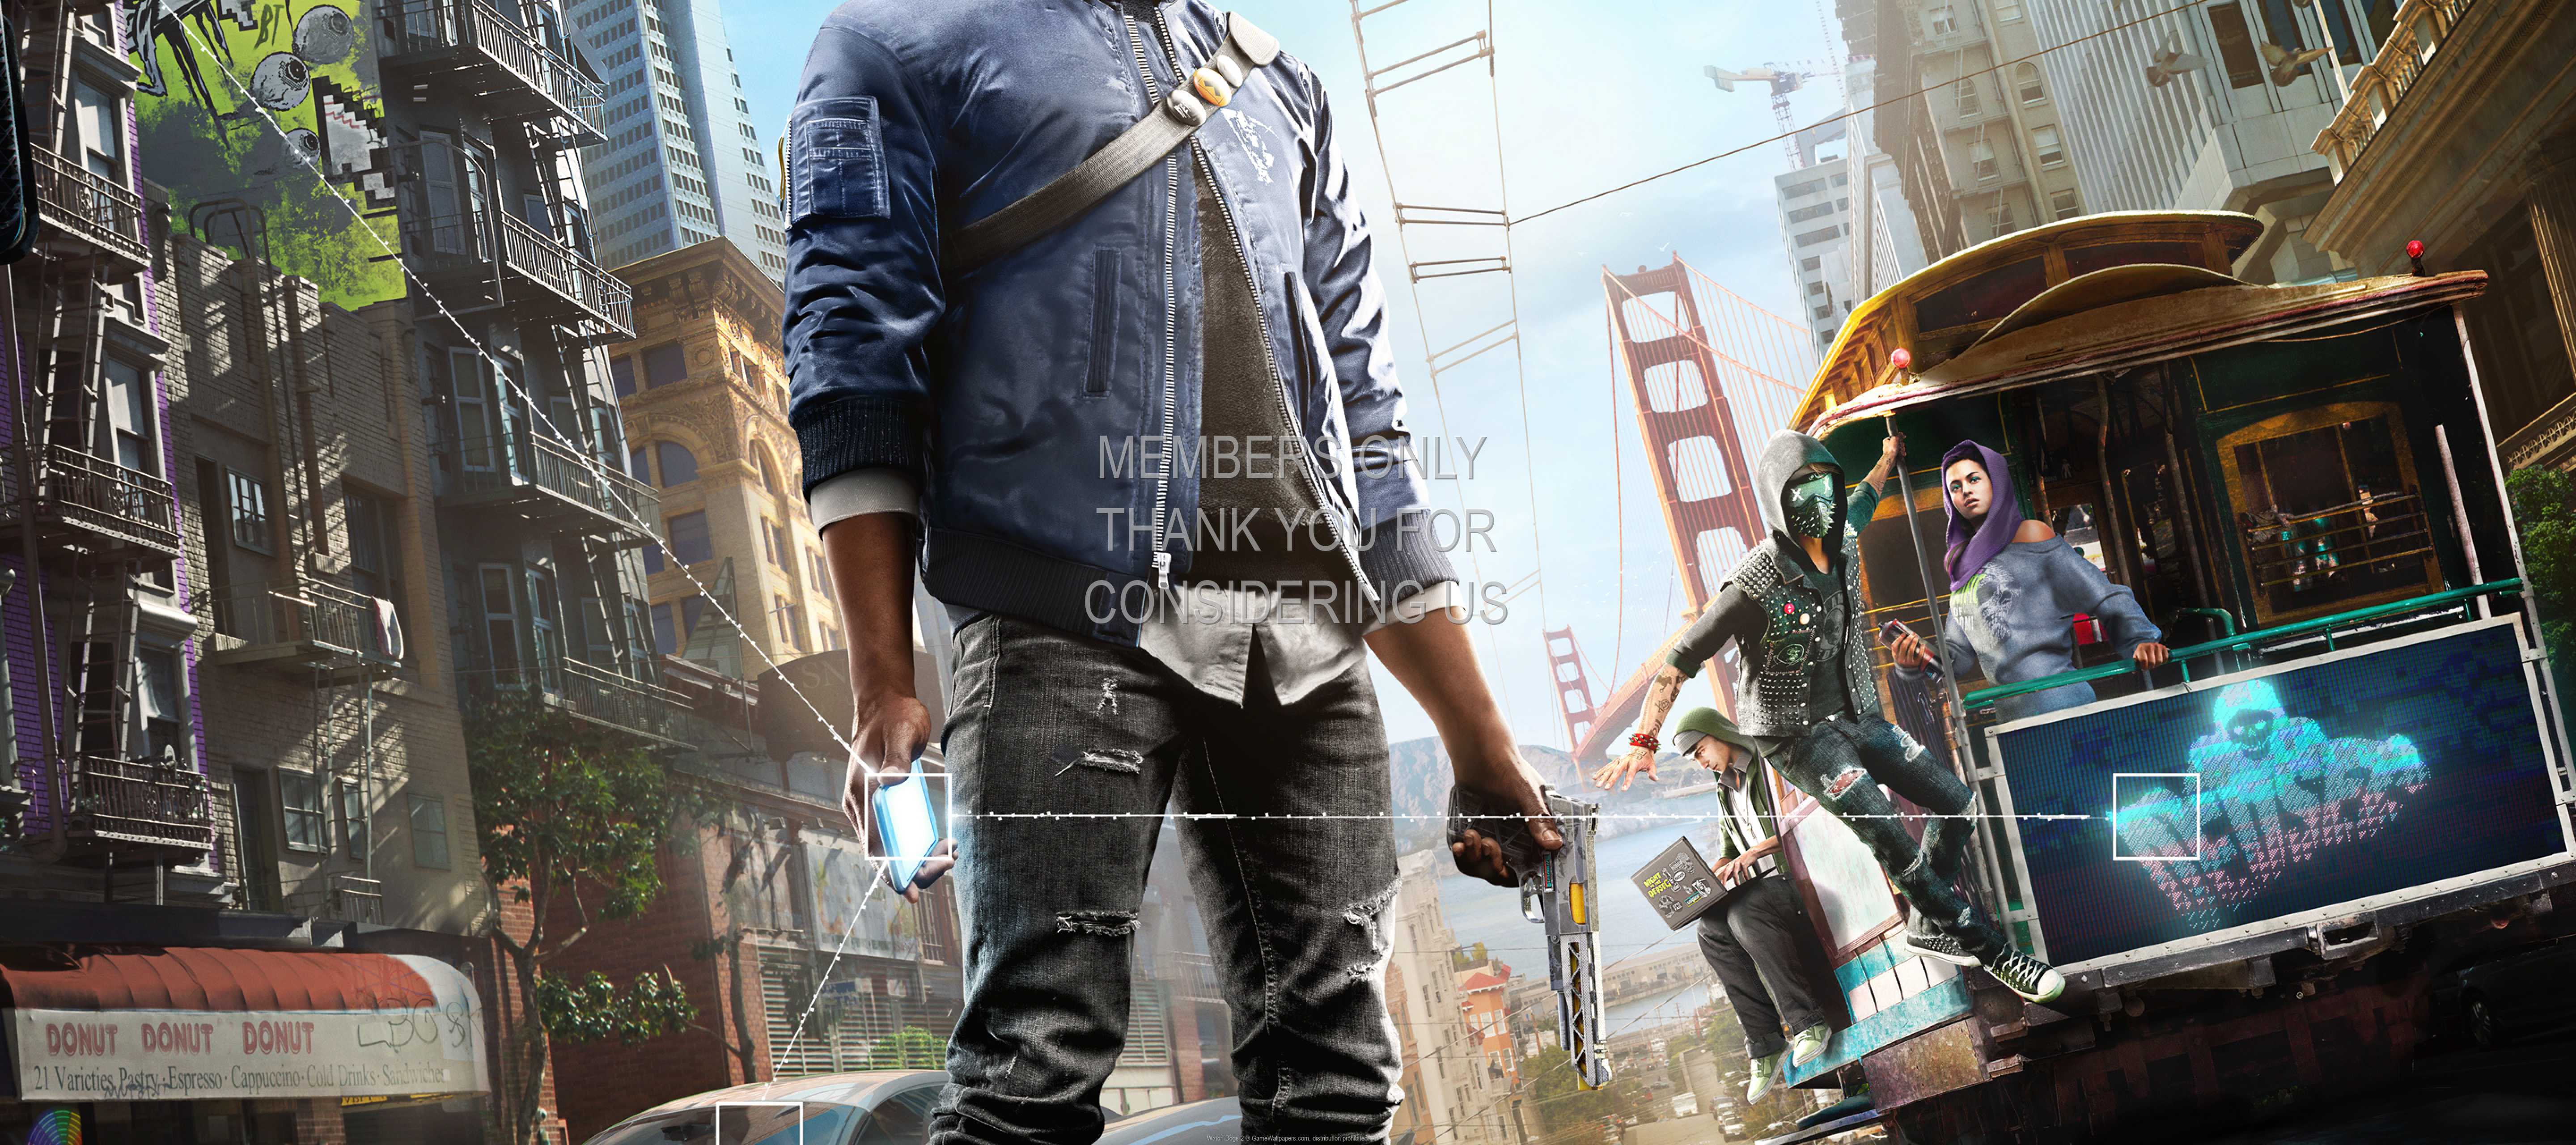 Watch Dogs 2 1440p%20Horizontal Mobile wallpaper or background 04